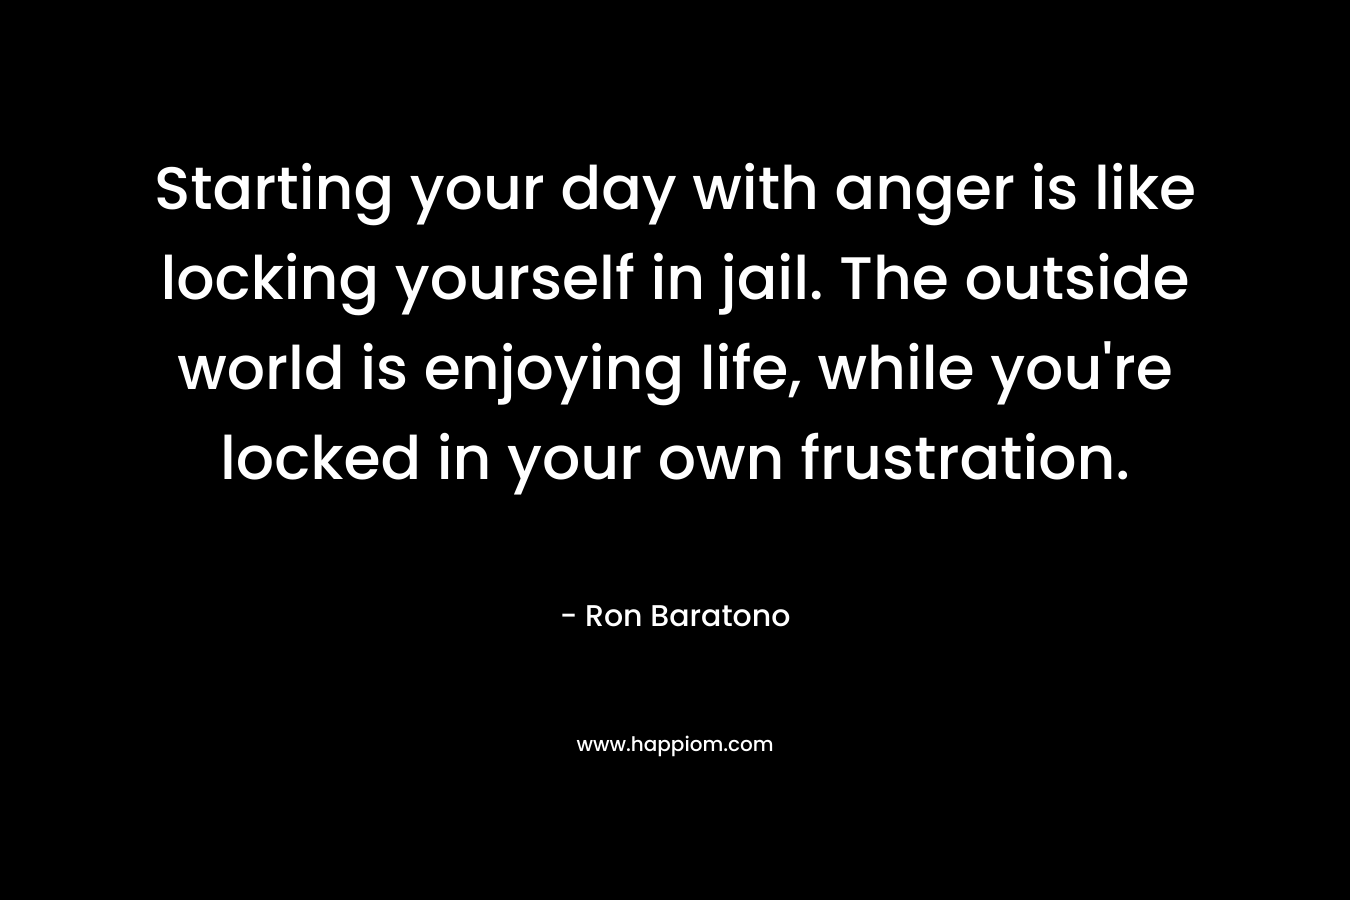 Starting your day with anger is like locking yourself in jail. The outside world is enjoying life, while you're locked in your own frustration.